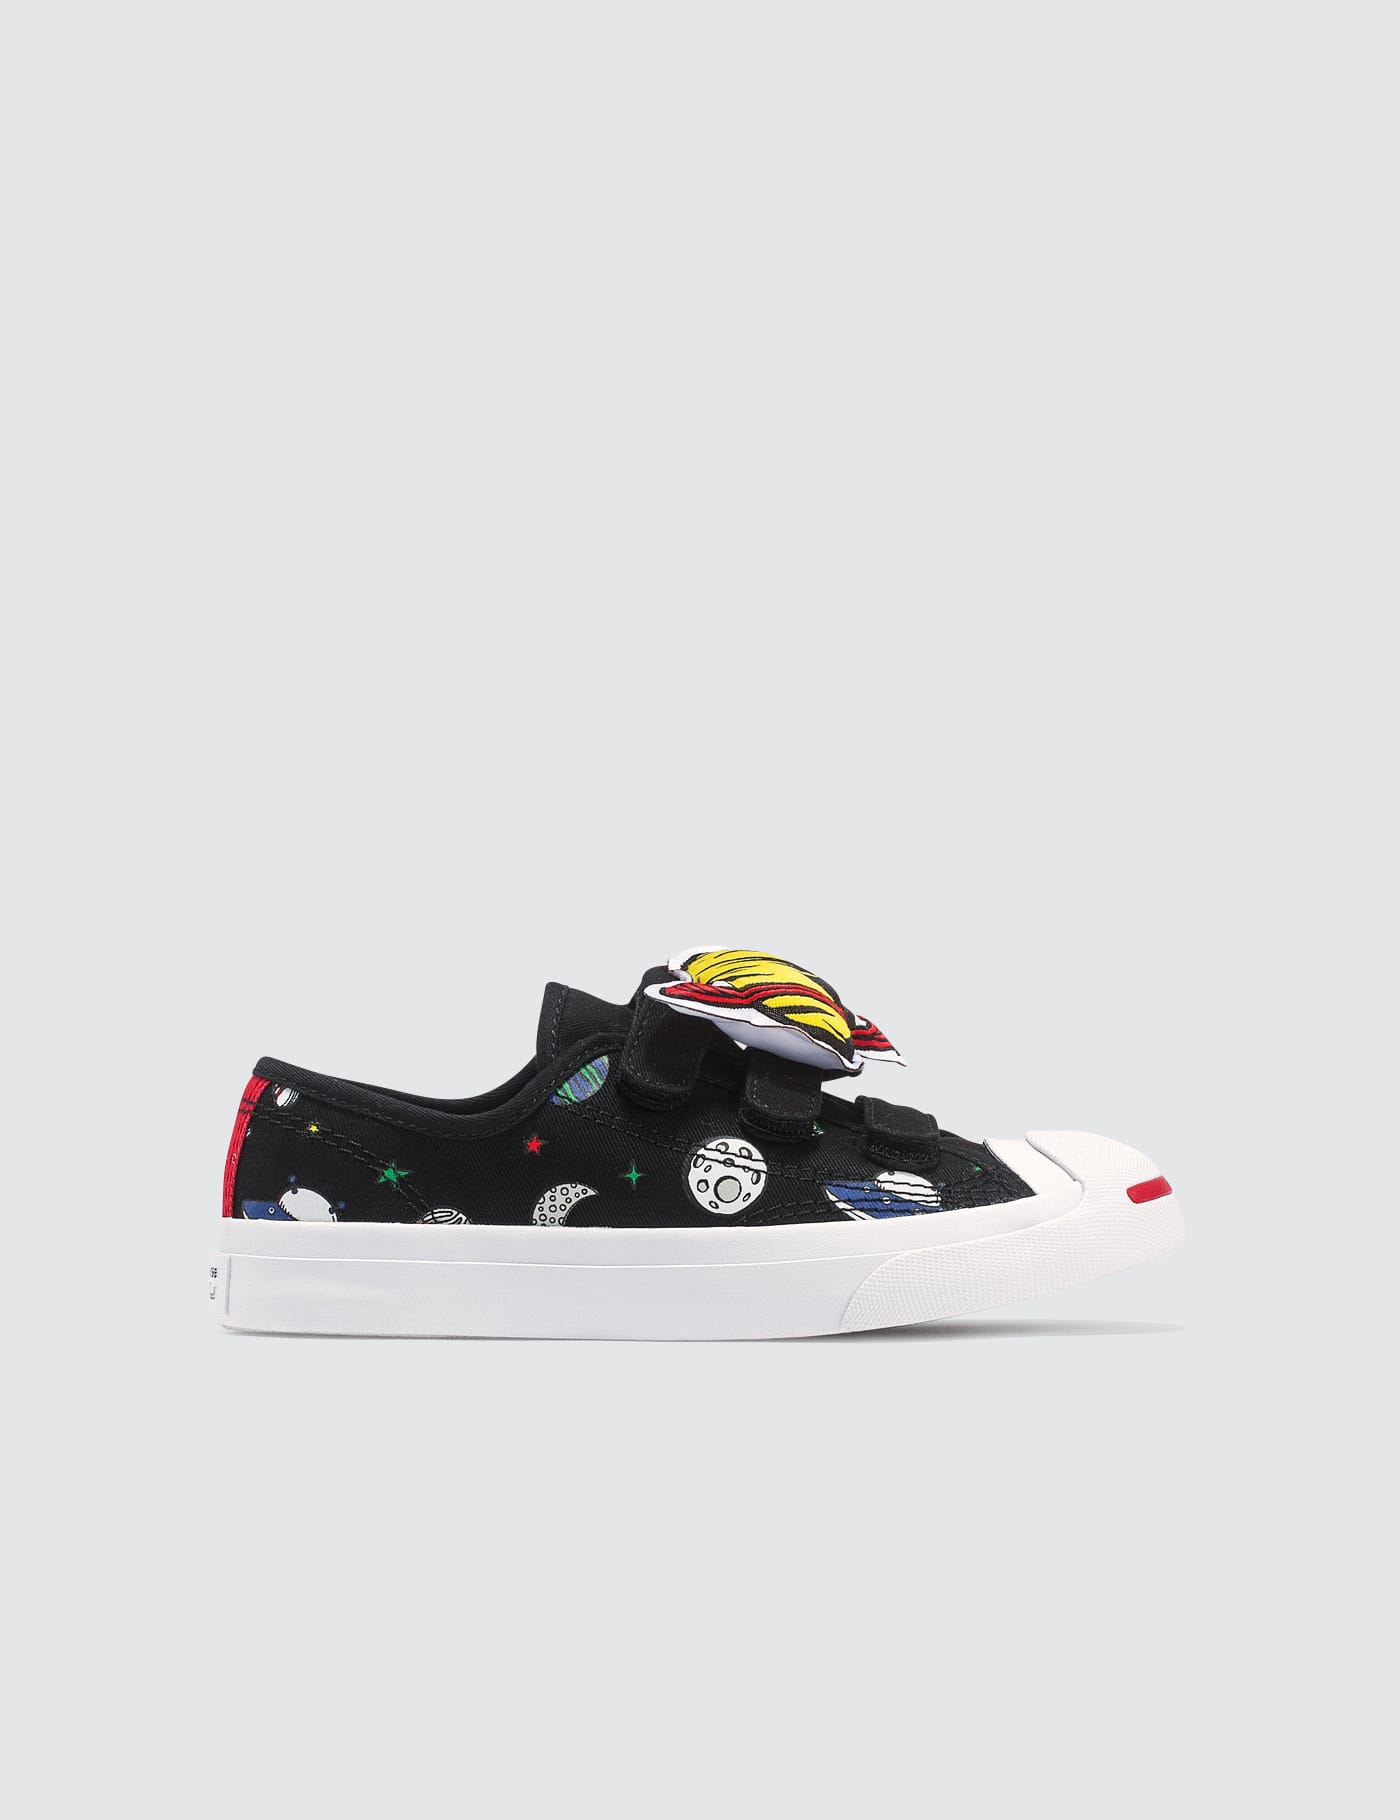 converse jack purcell kids